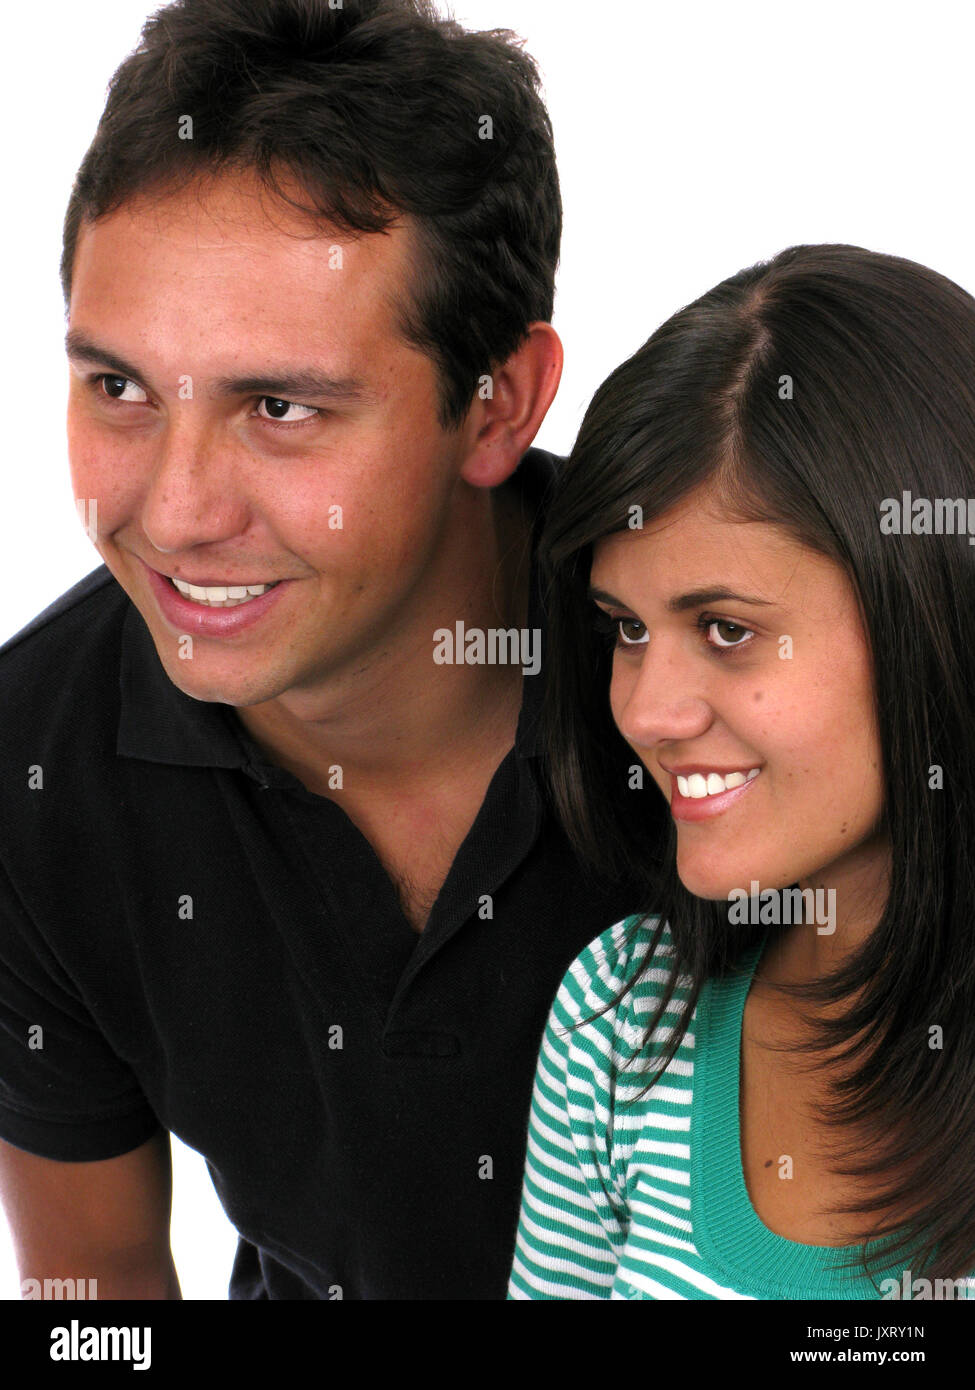 Couple full of dreams over  white background Stock Photo